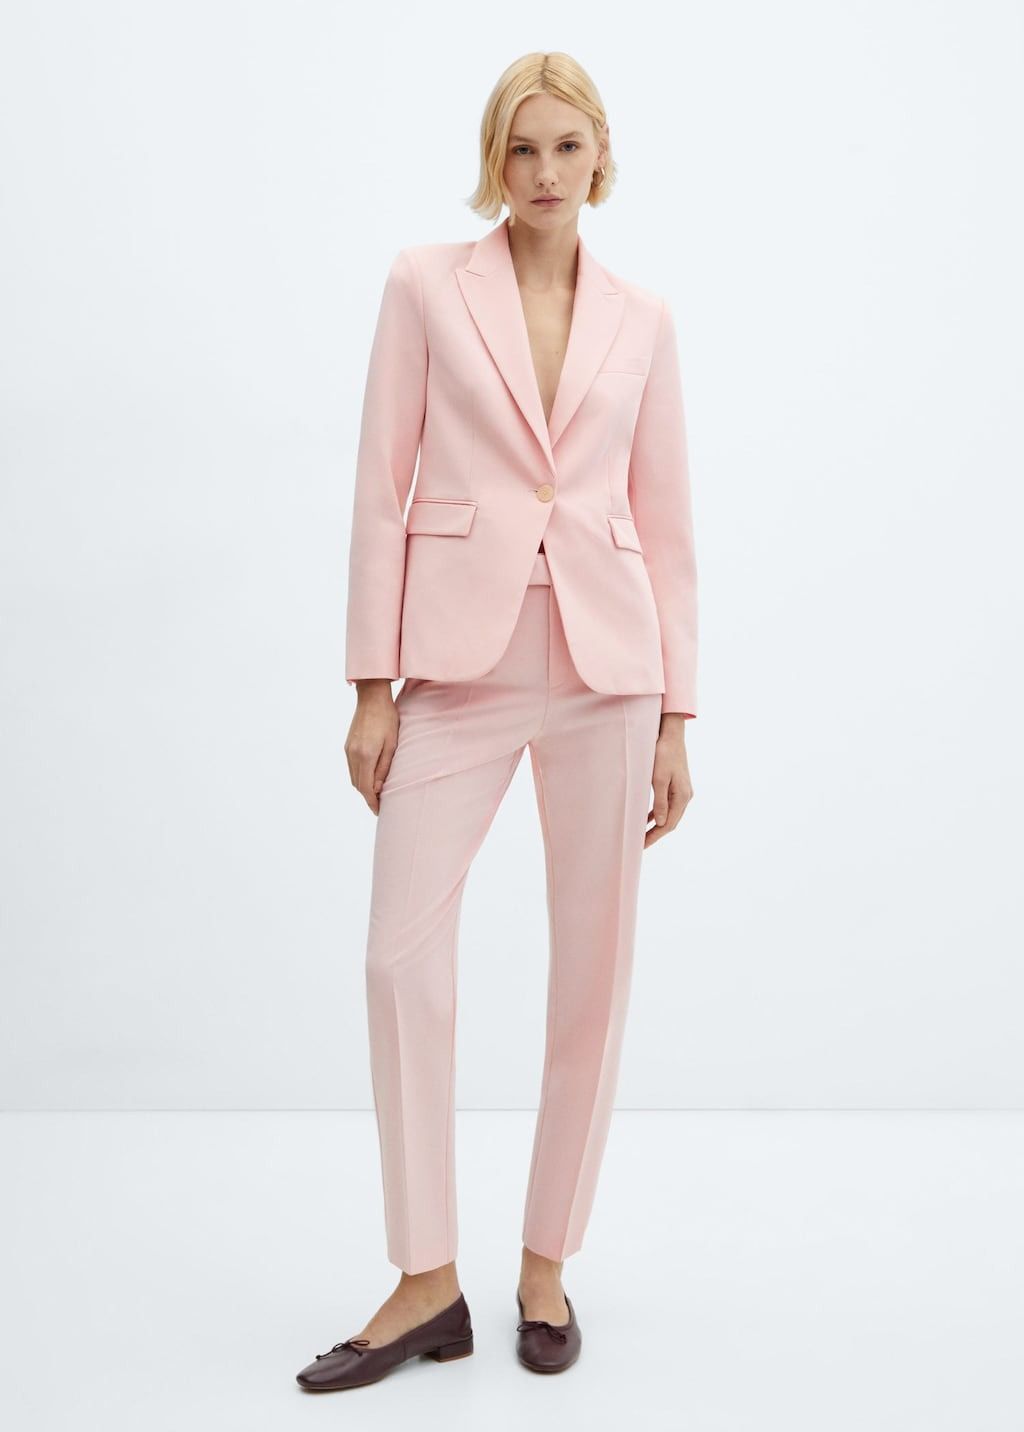 Chiffon Mother Of Bride Pantsuits With Jacket Formal Wear For Beach Weddings  And Special Occasions Plus Size Available From Sweetybridal01, $92.47 |  DHgate.Com